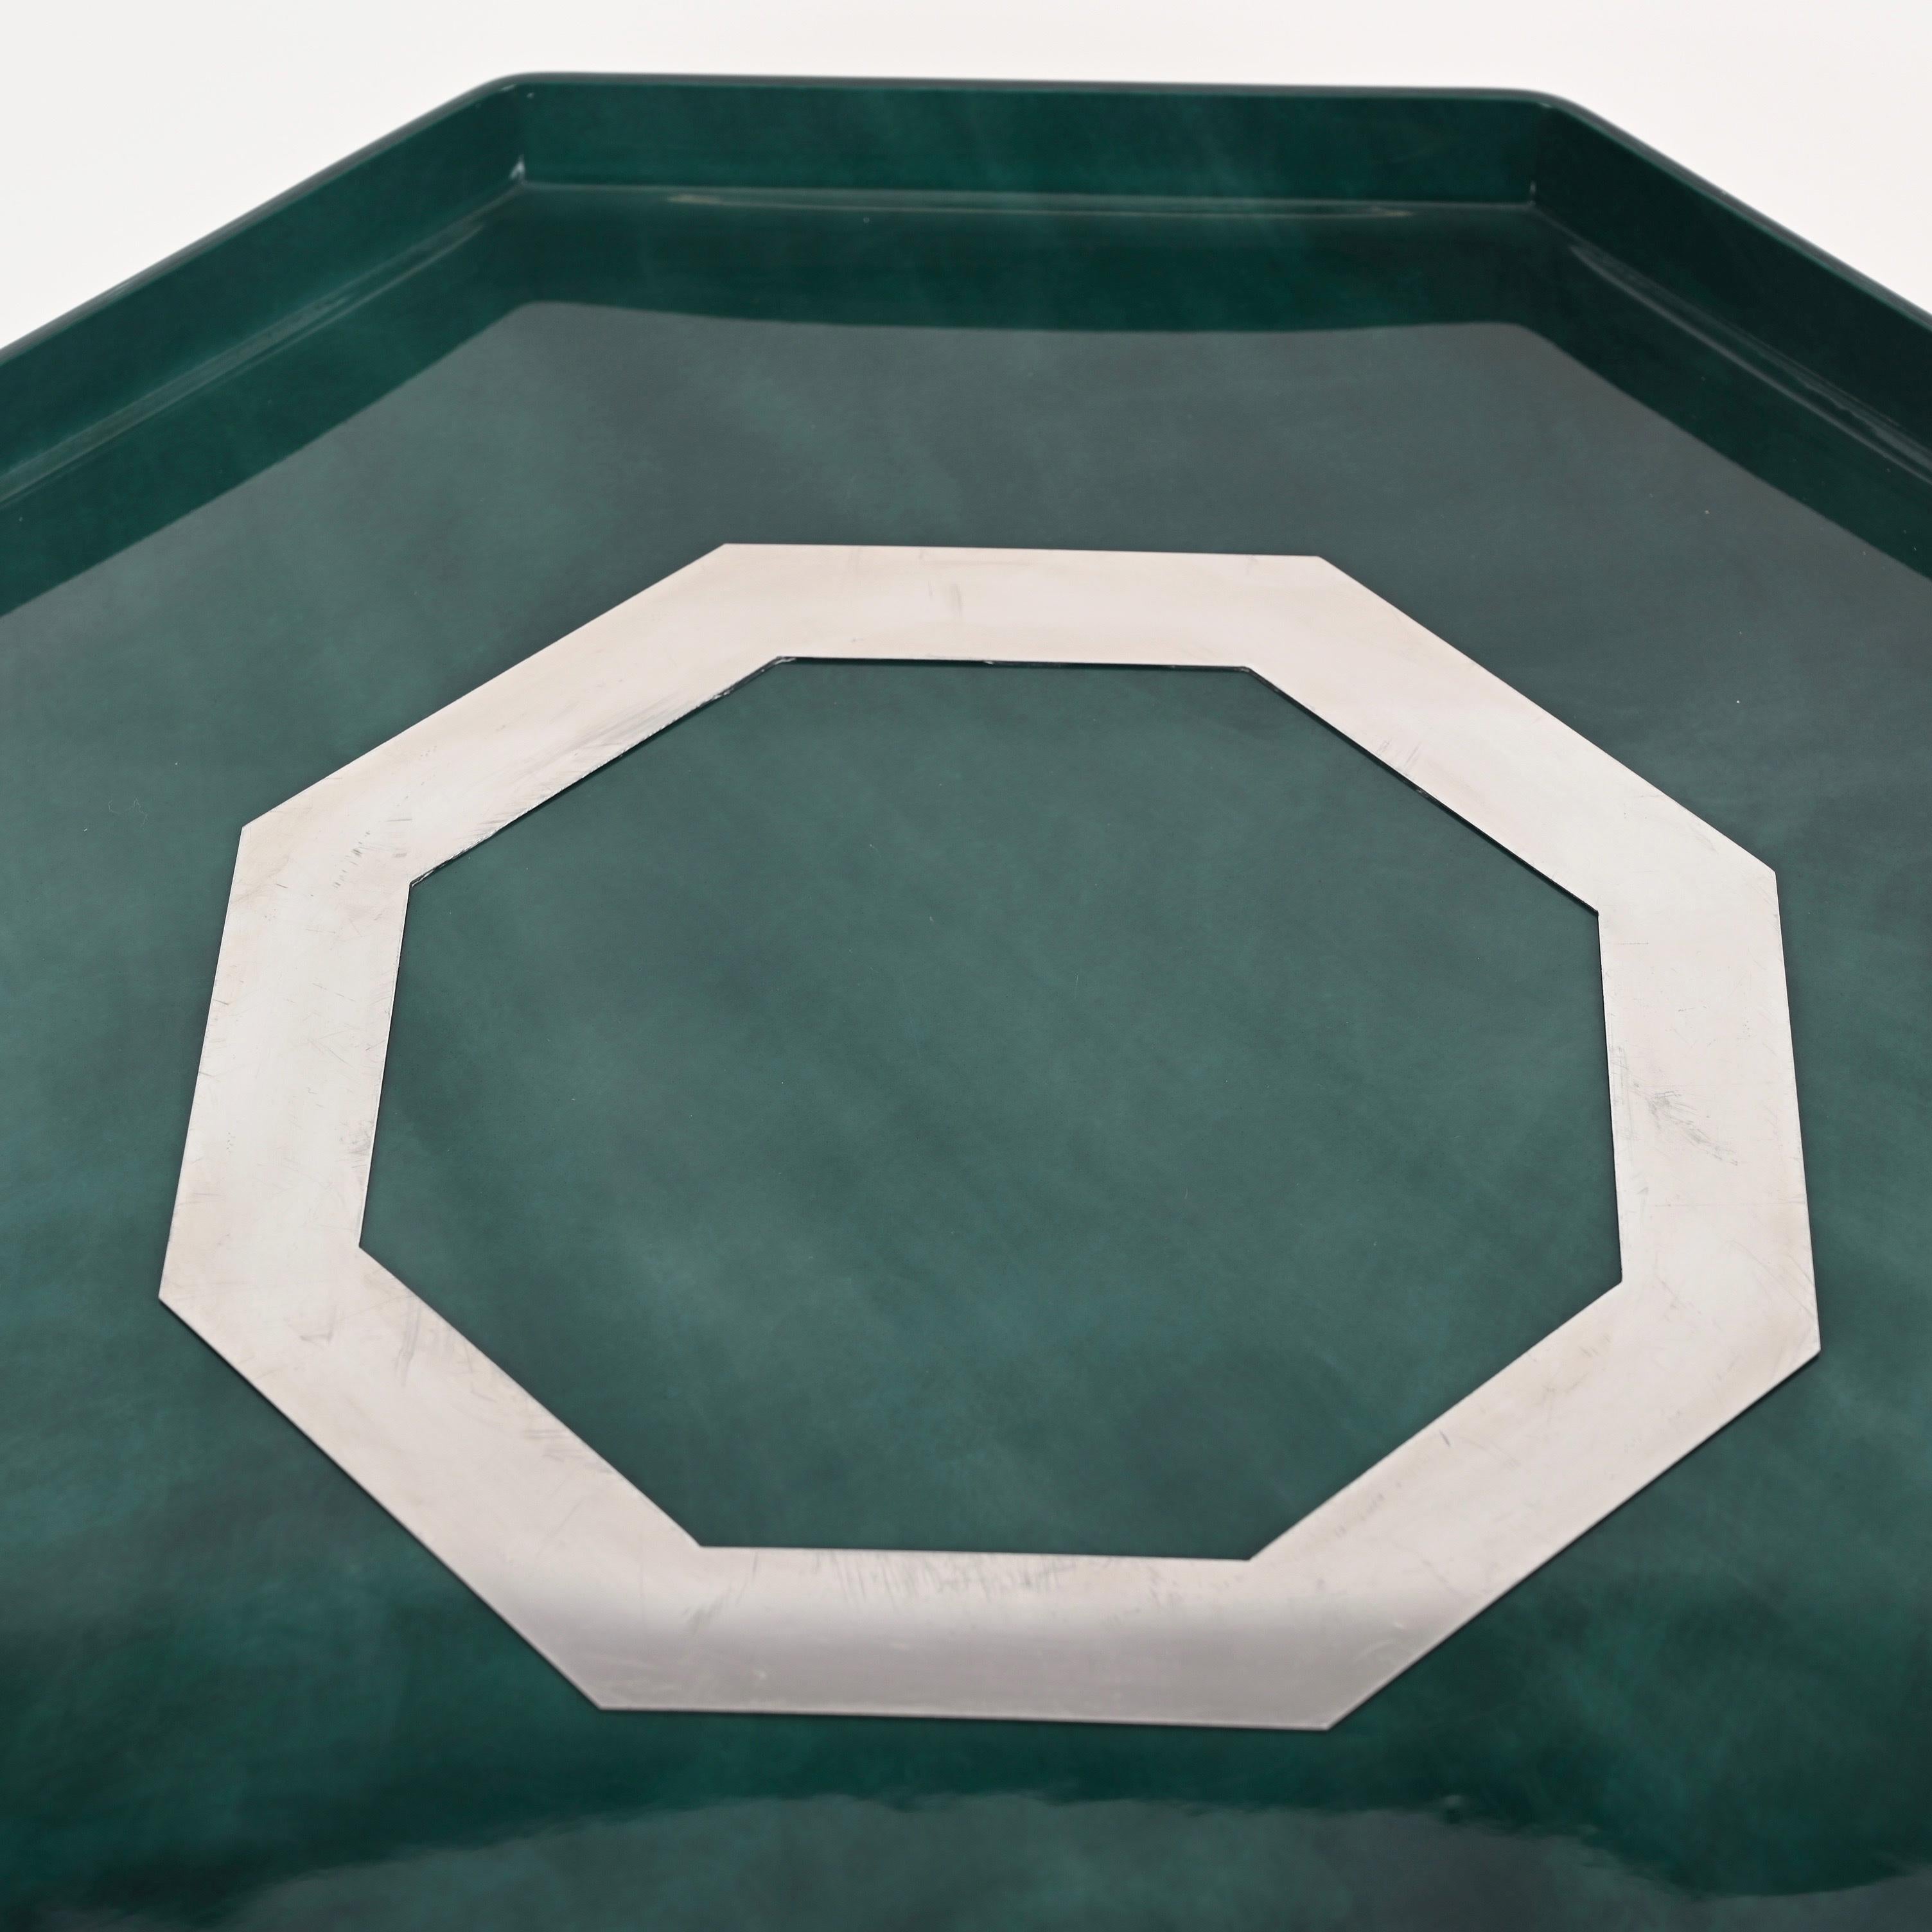 Midcentury Marble Effect Lucite and Steel Octagonal Serving Tray, Italy, 1980s For Sale 2